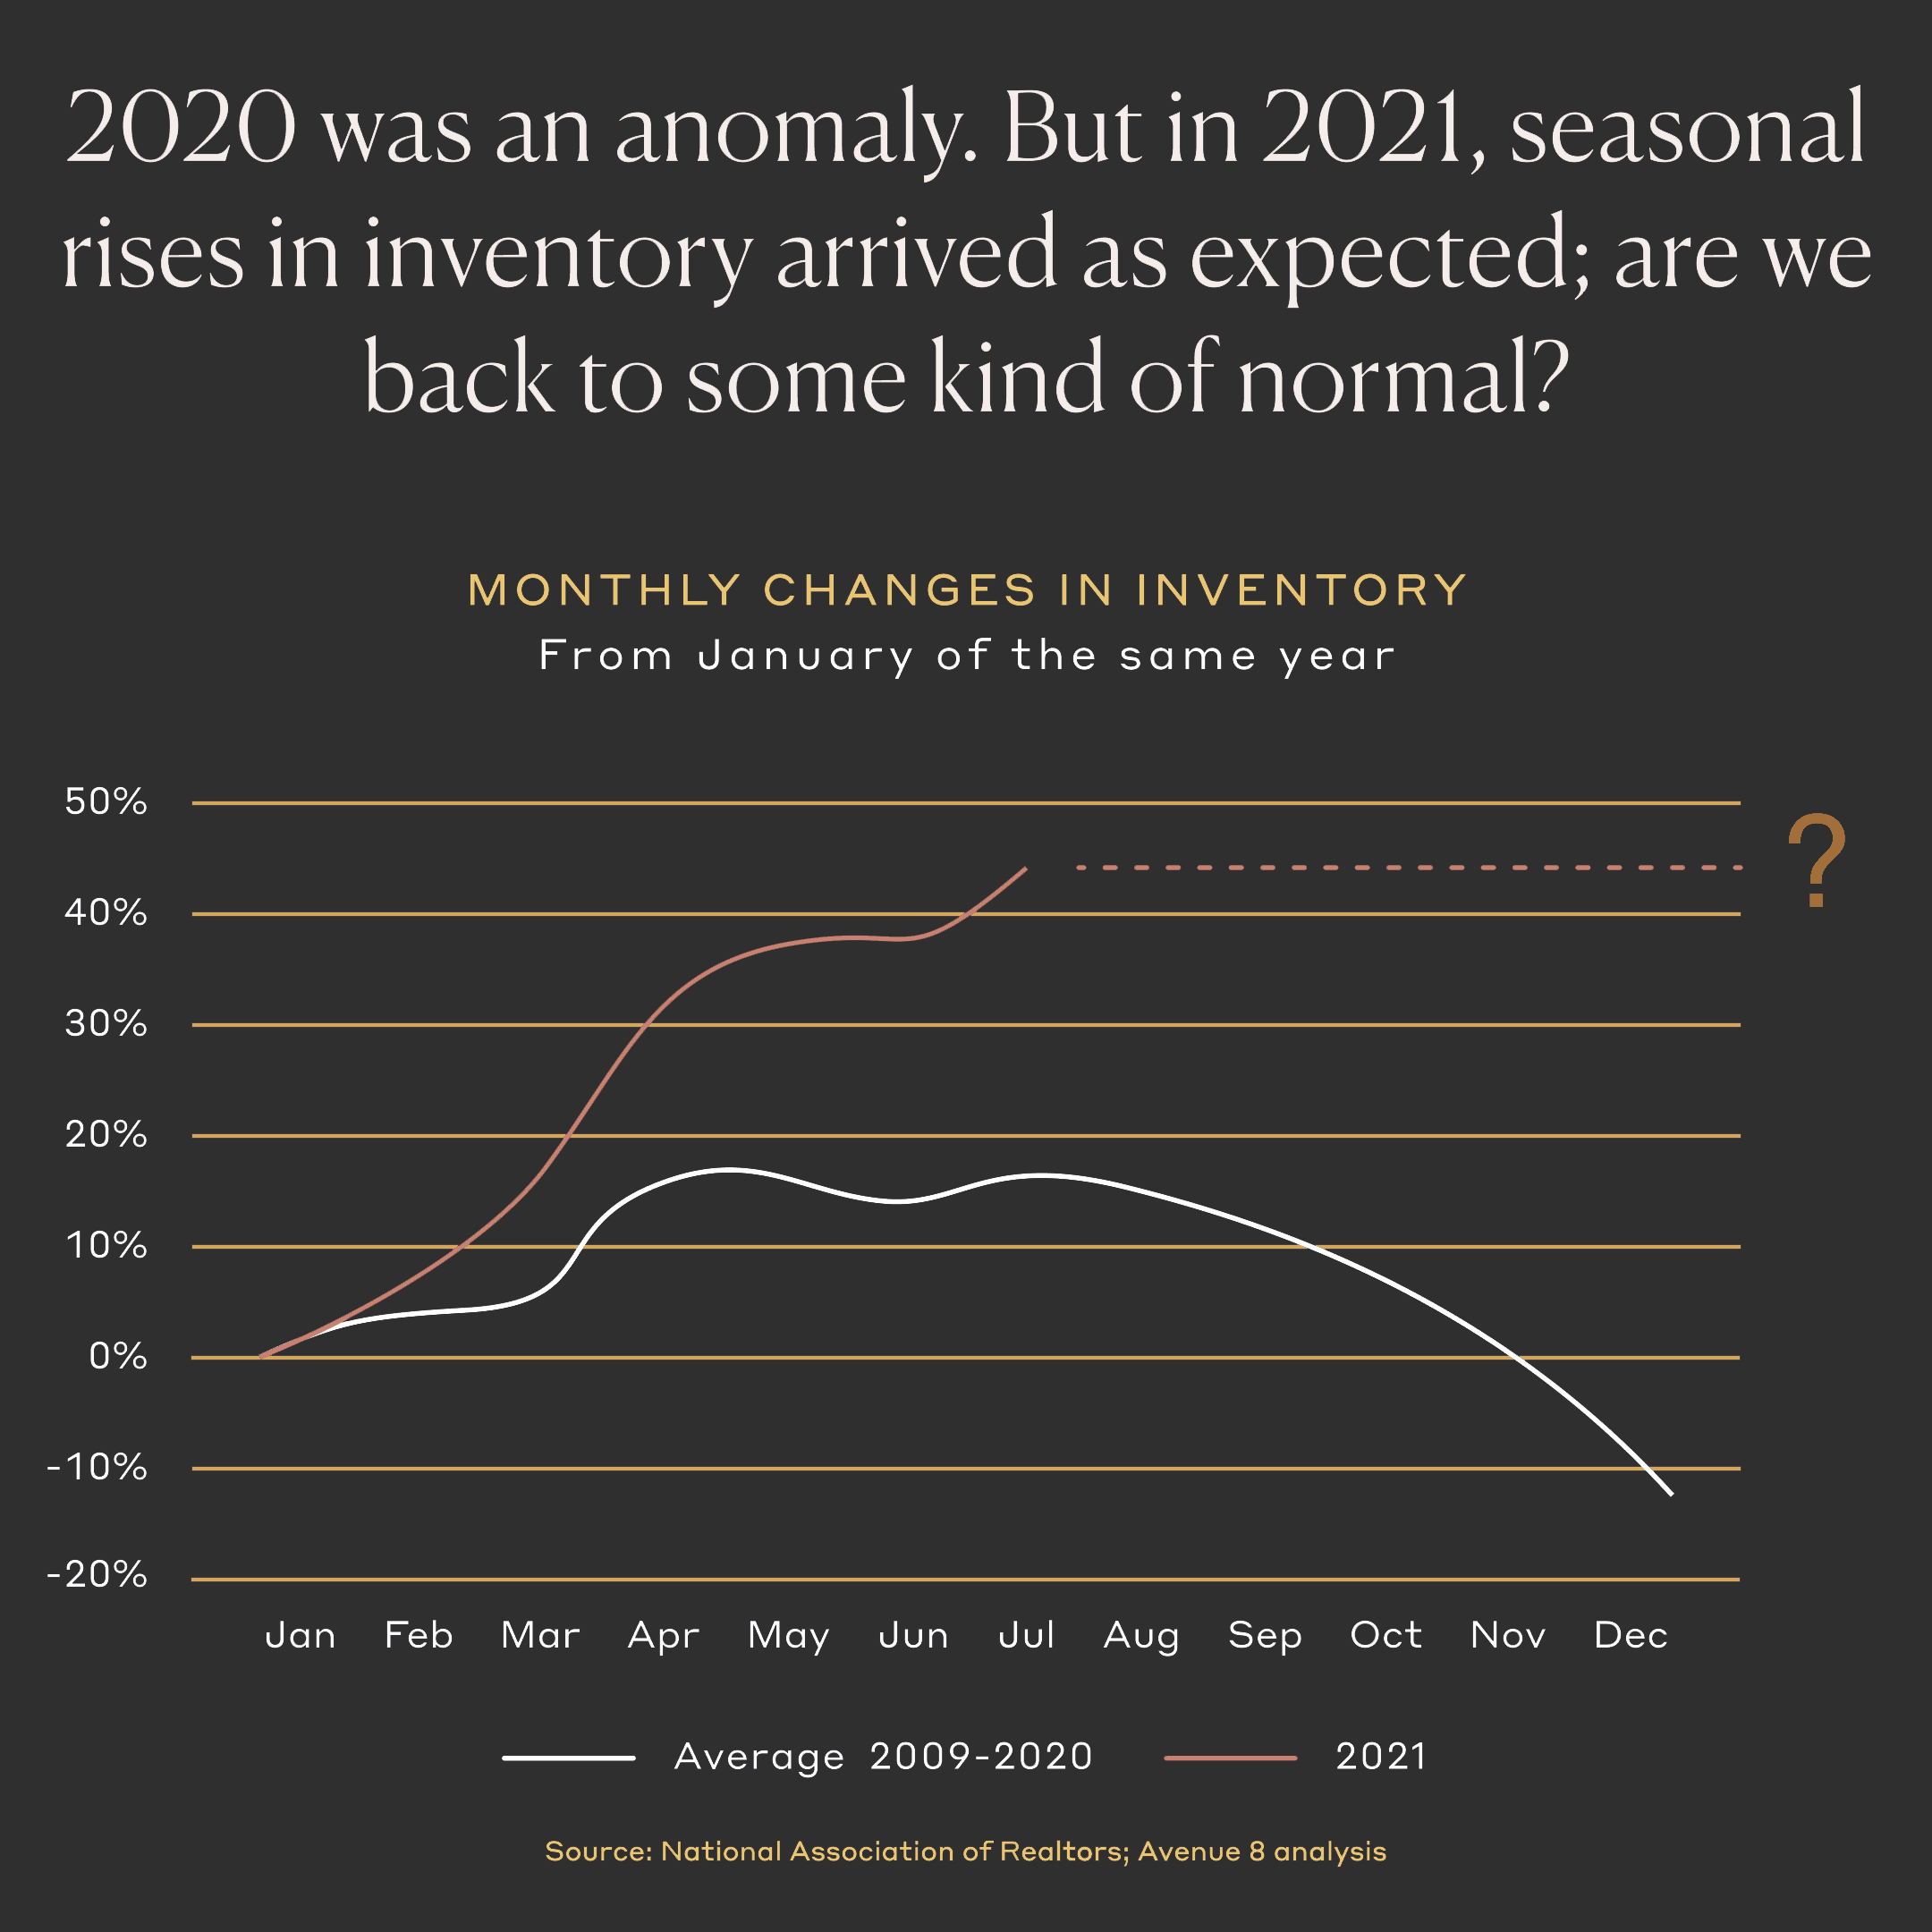 2020 was an anomaly. But in 2021, seasonal rises in inventory arrived as expected; are we back to some kind of normal?